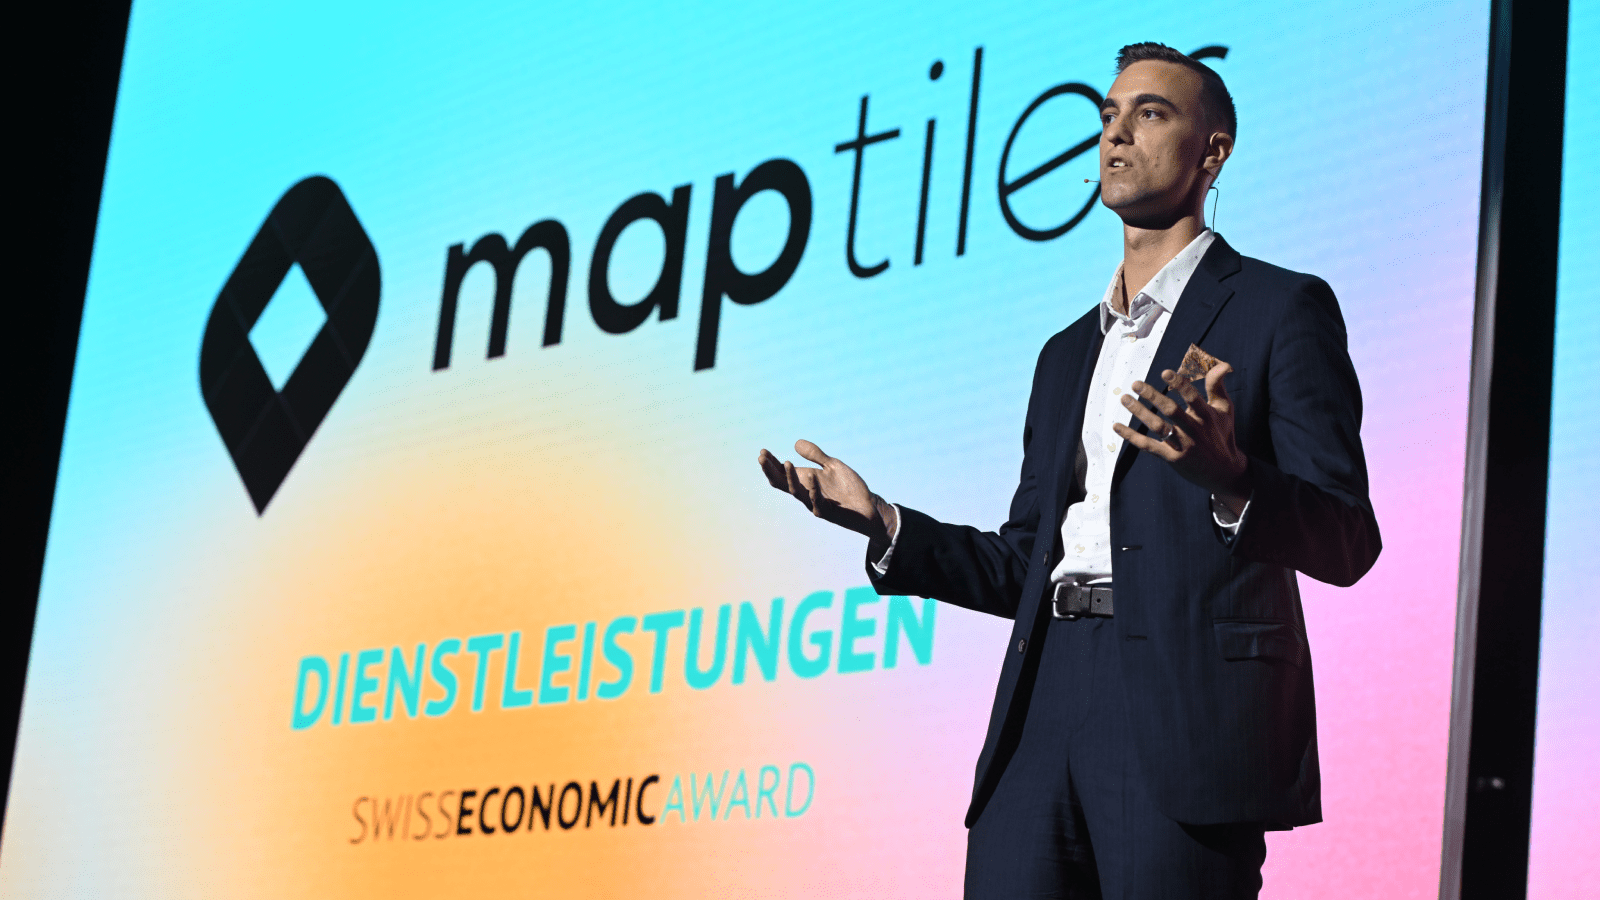 MapTiler are finalists at the Swiss Economic Forum image